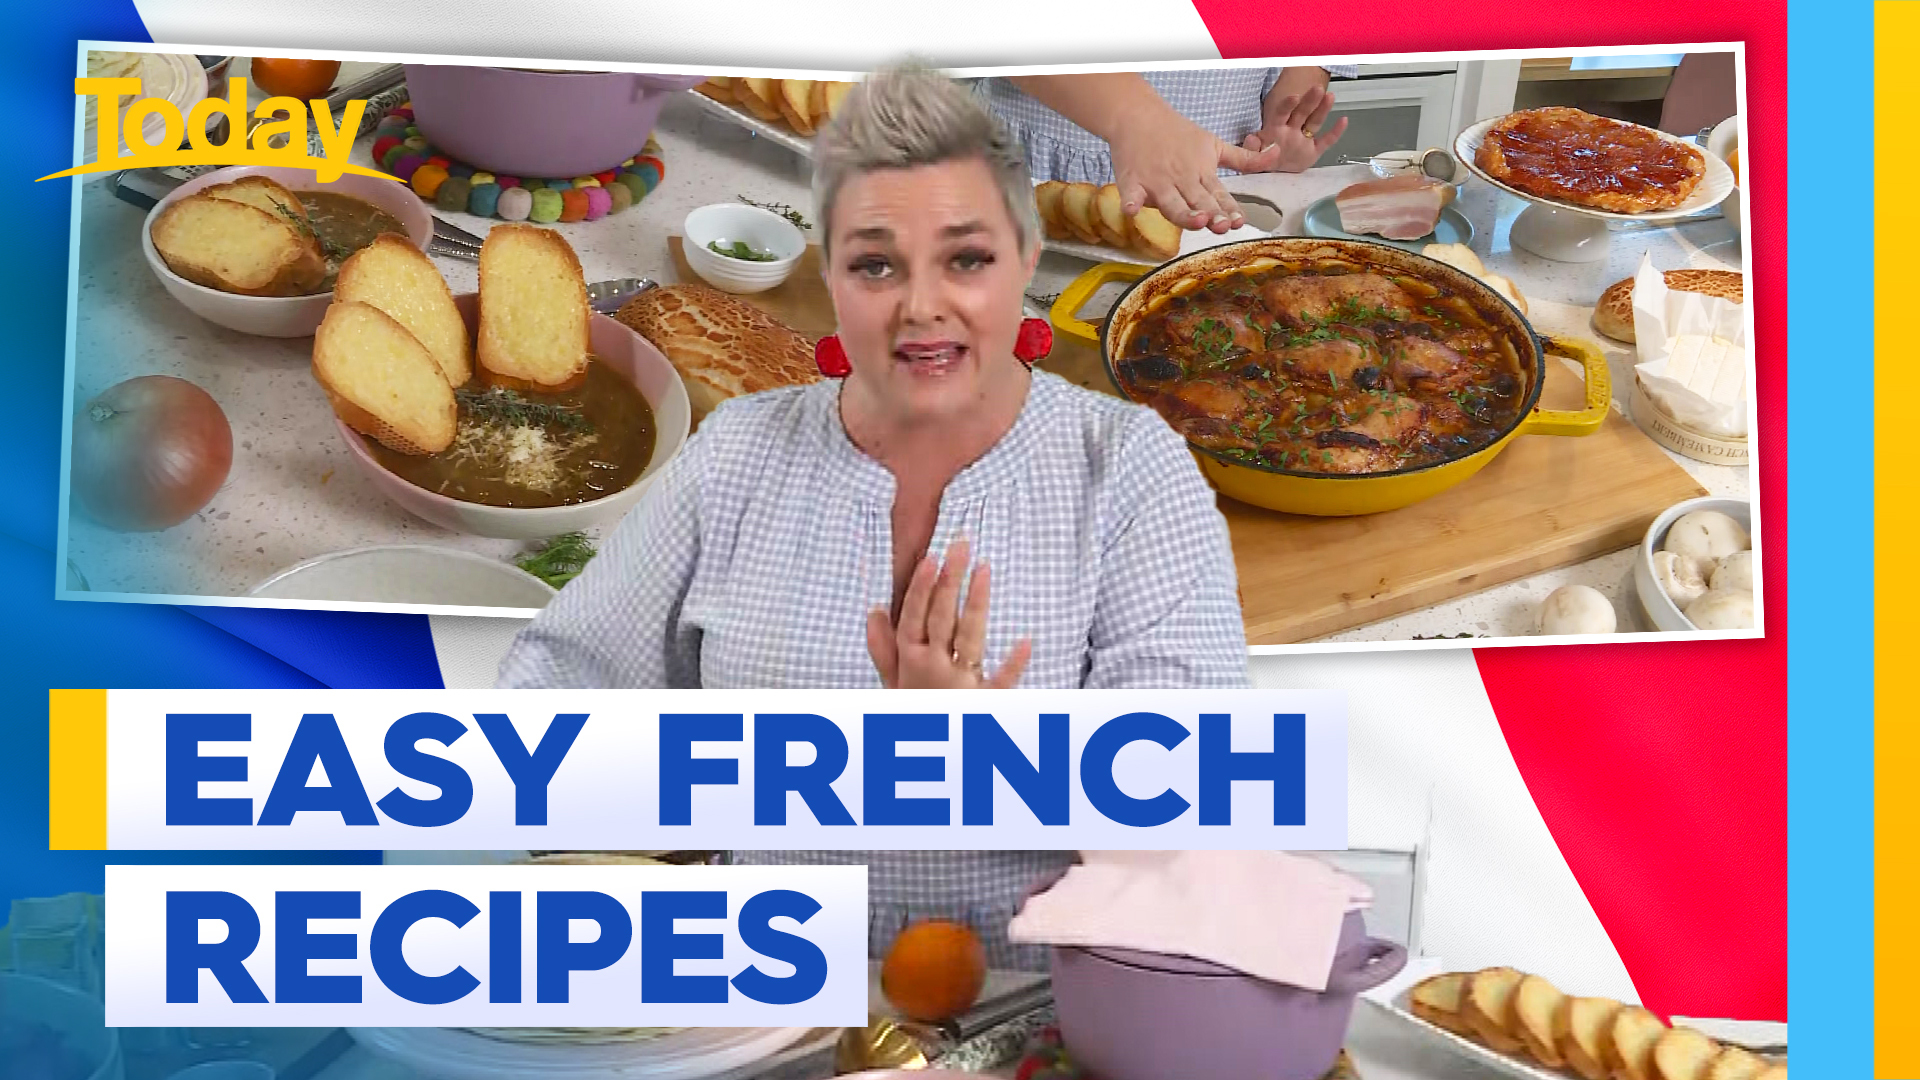 Easy French recipes to celebrate the Olympics